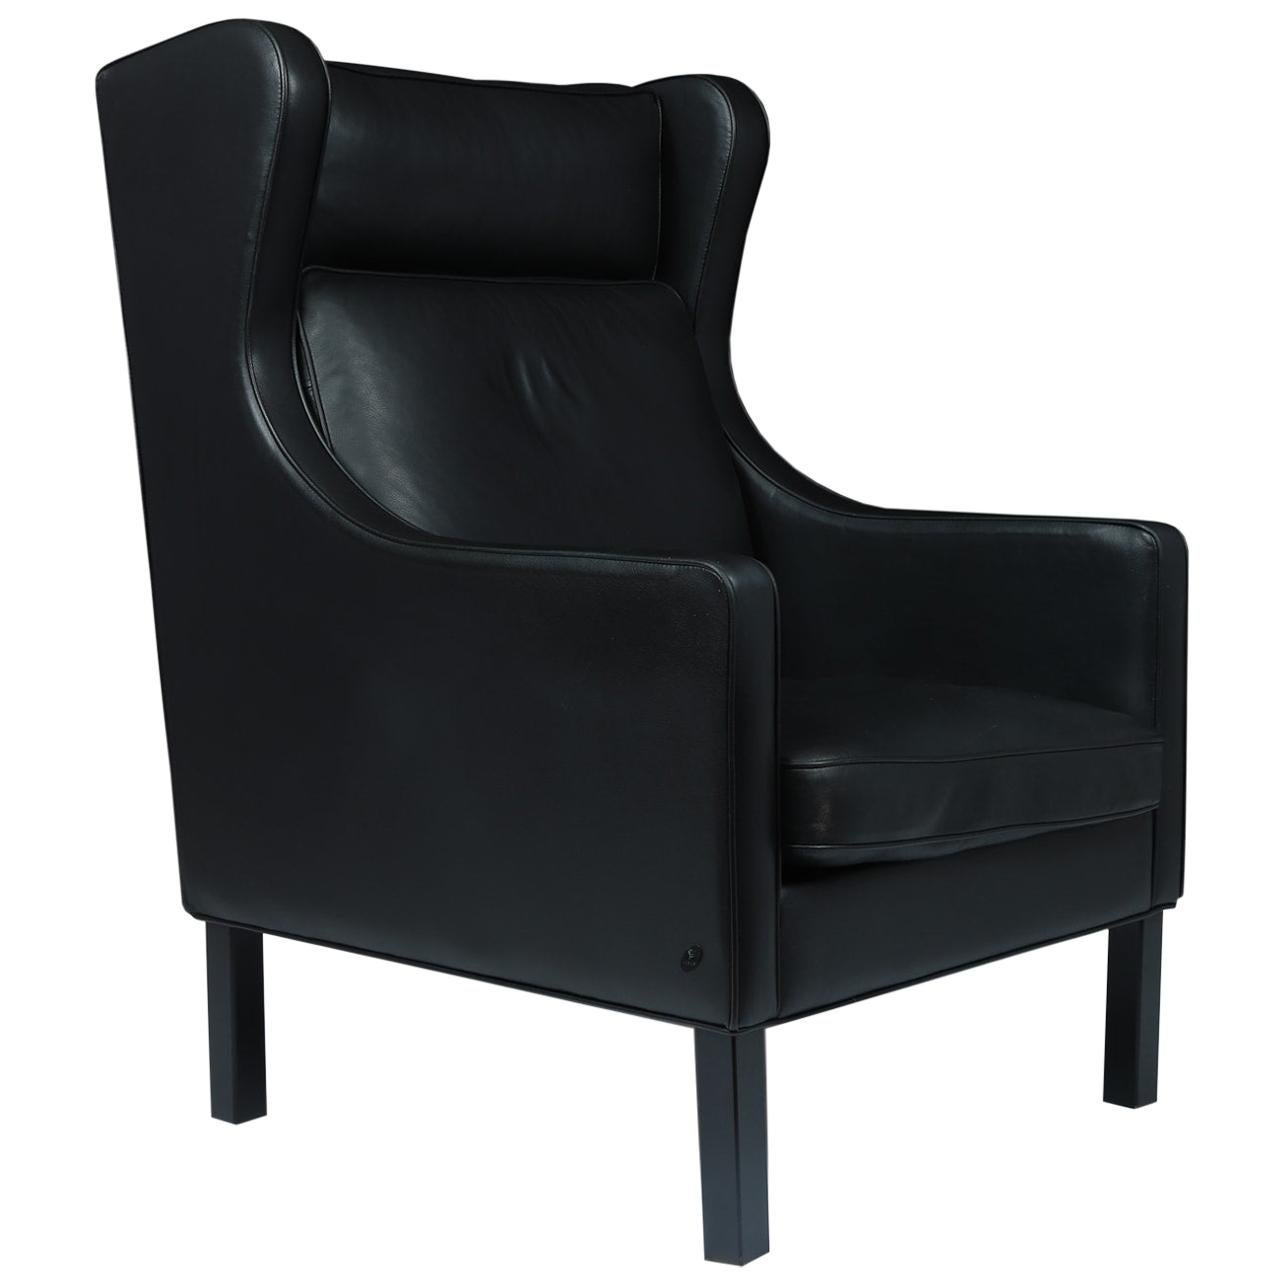 Danish, Mid-Century Modern, Wing Chair in Black Leather by Hurup, circa 1980 For Sale